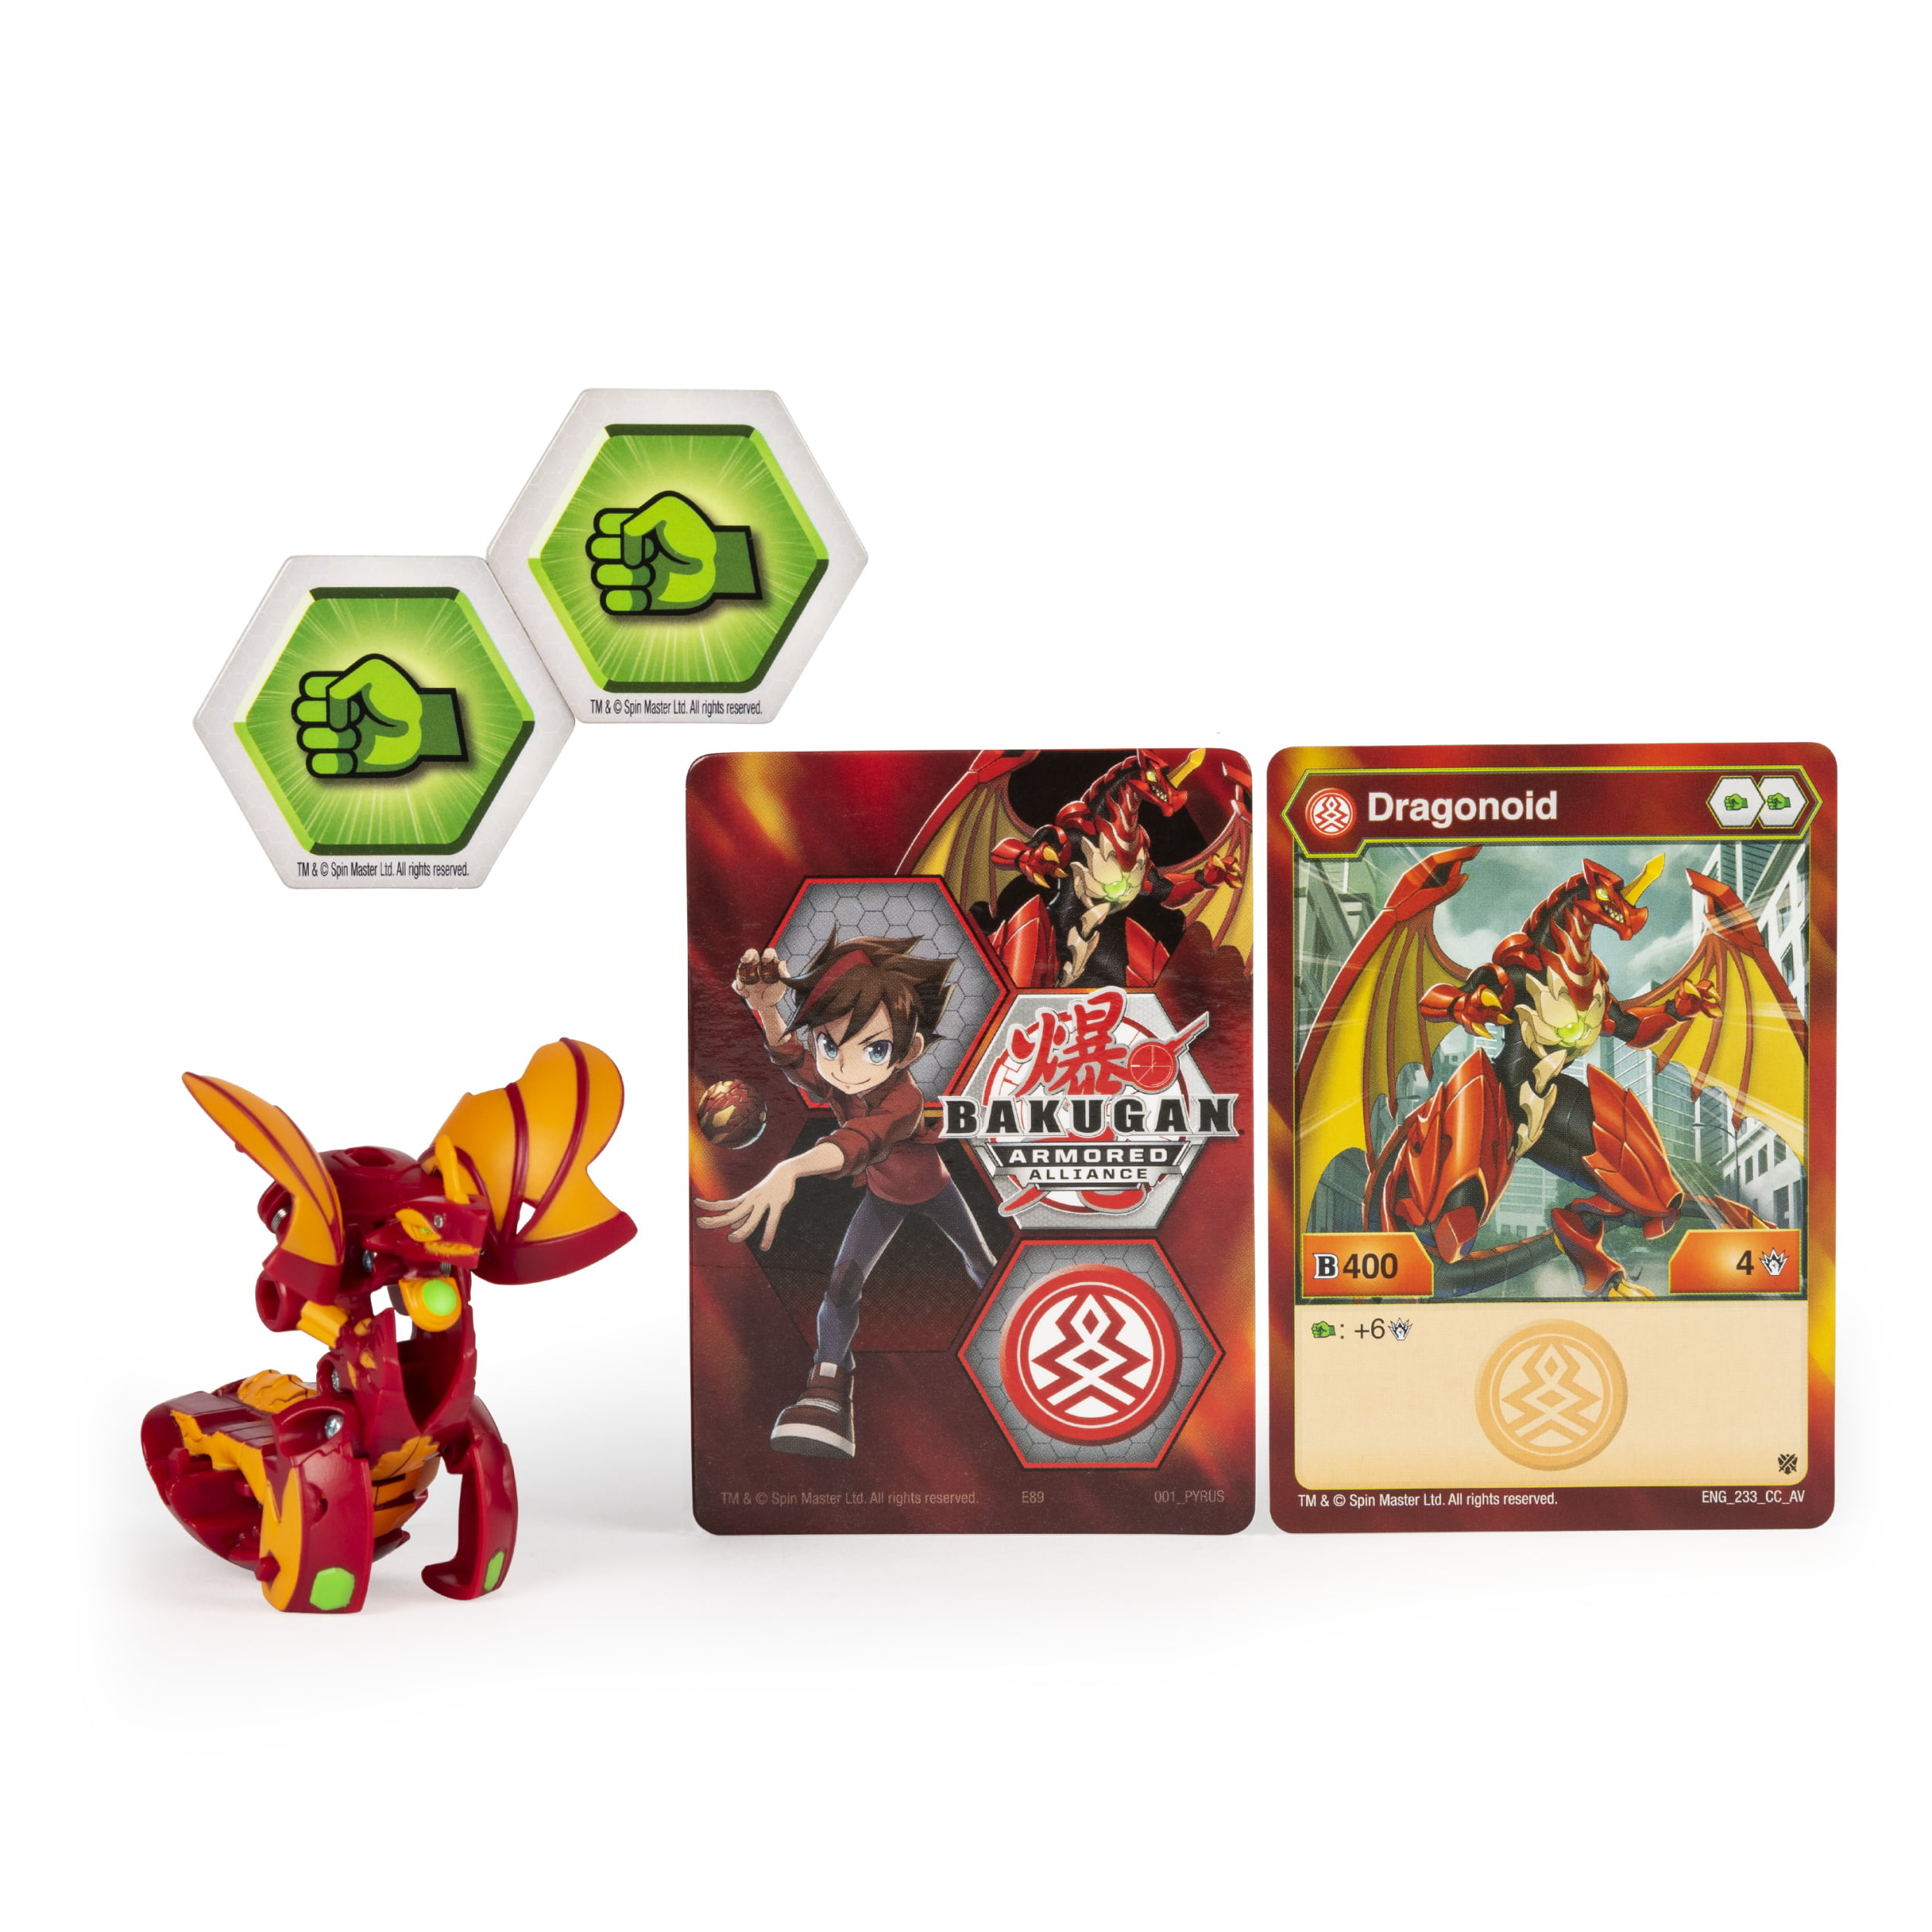 Bakugan Dragonoid 2 Inch Tall Armored Alliance Collectible